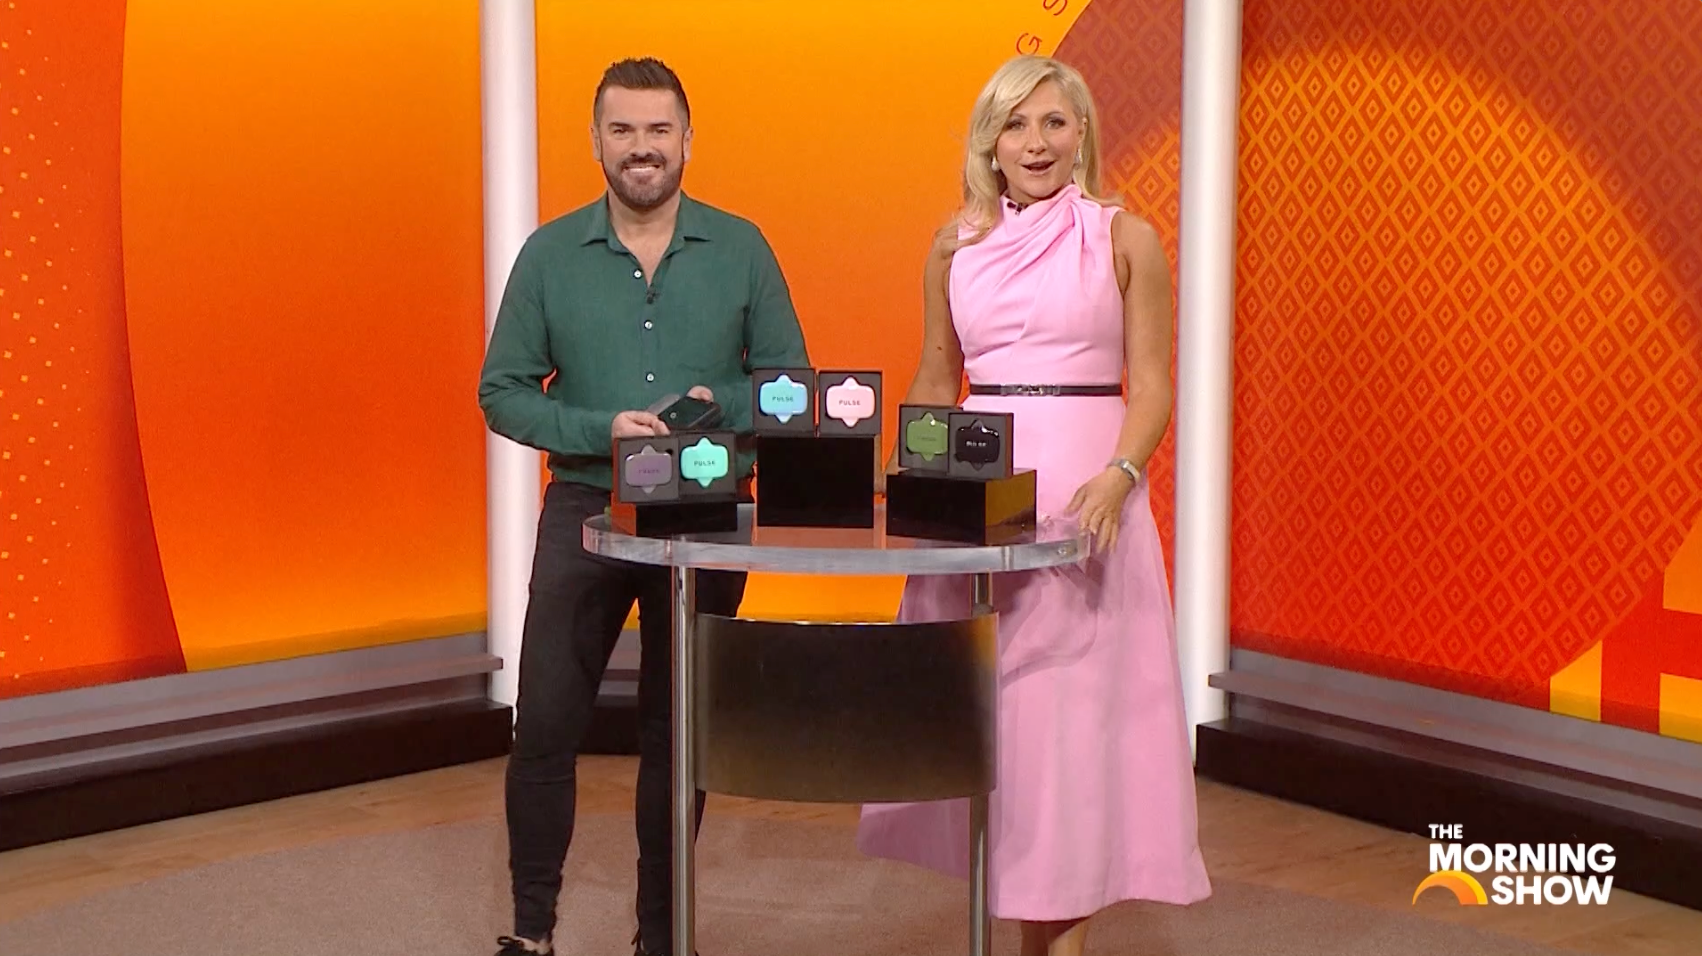 Load video: The Morning Show Featuring Pulse Charge Venus